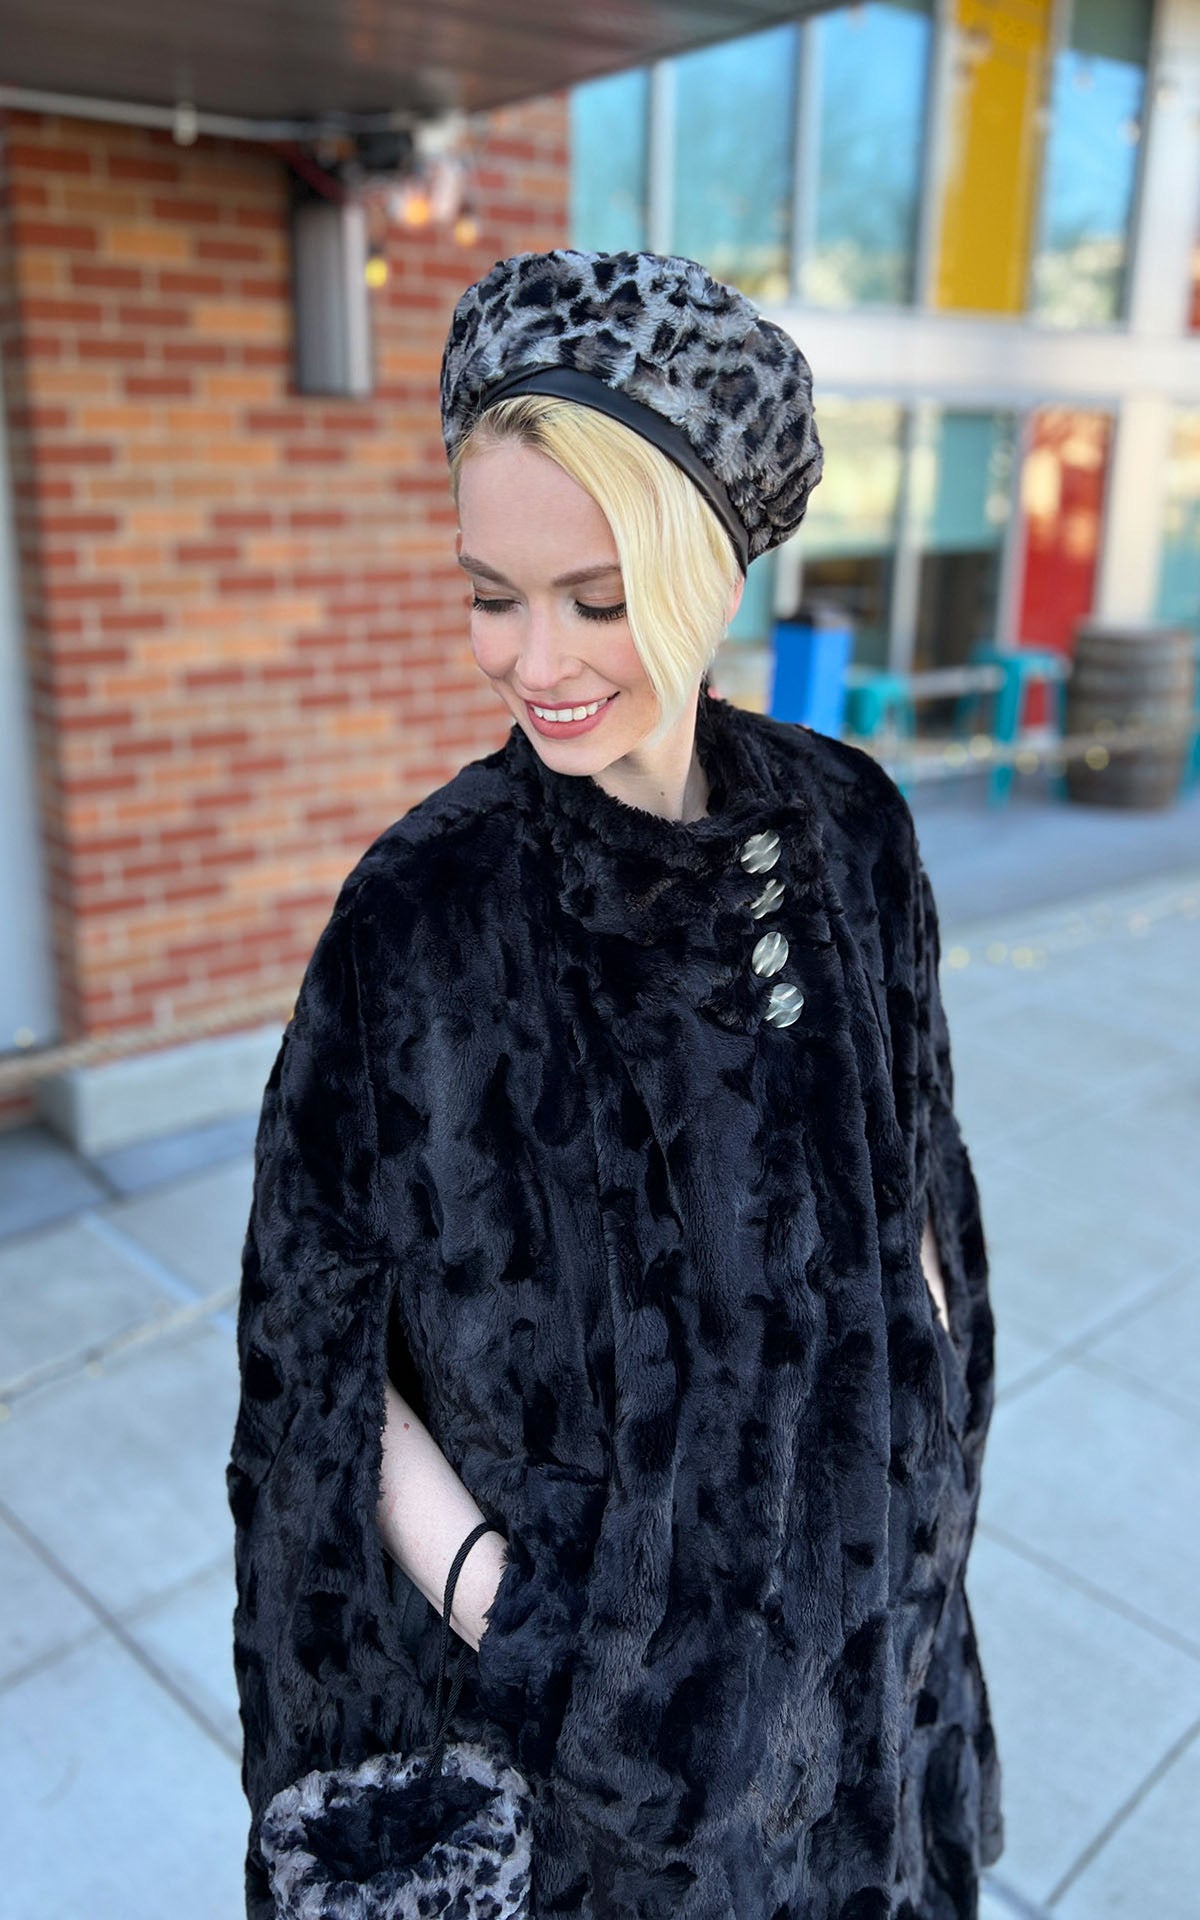 Long Cape with Beret and Muff | Cuddly Black Faux Fur with Savannah Cat | Handmade in Seattle WA USA by Pandemonium Millinery